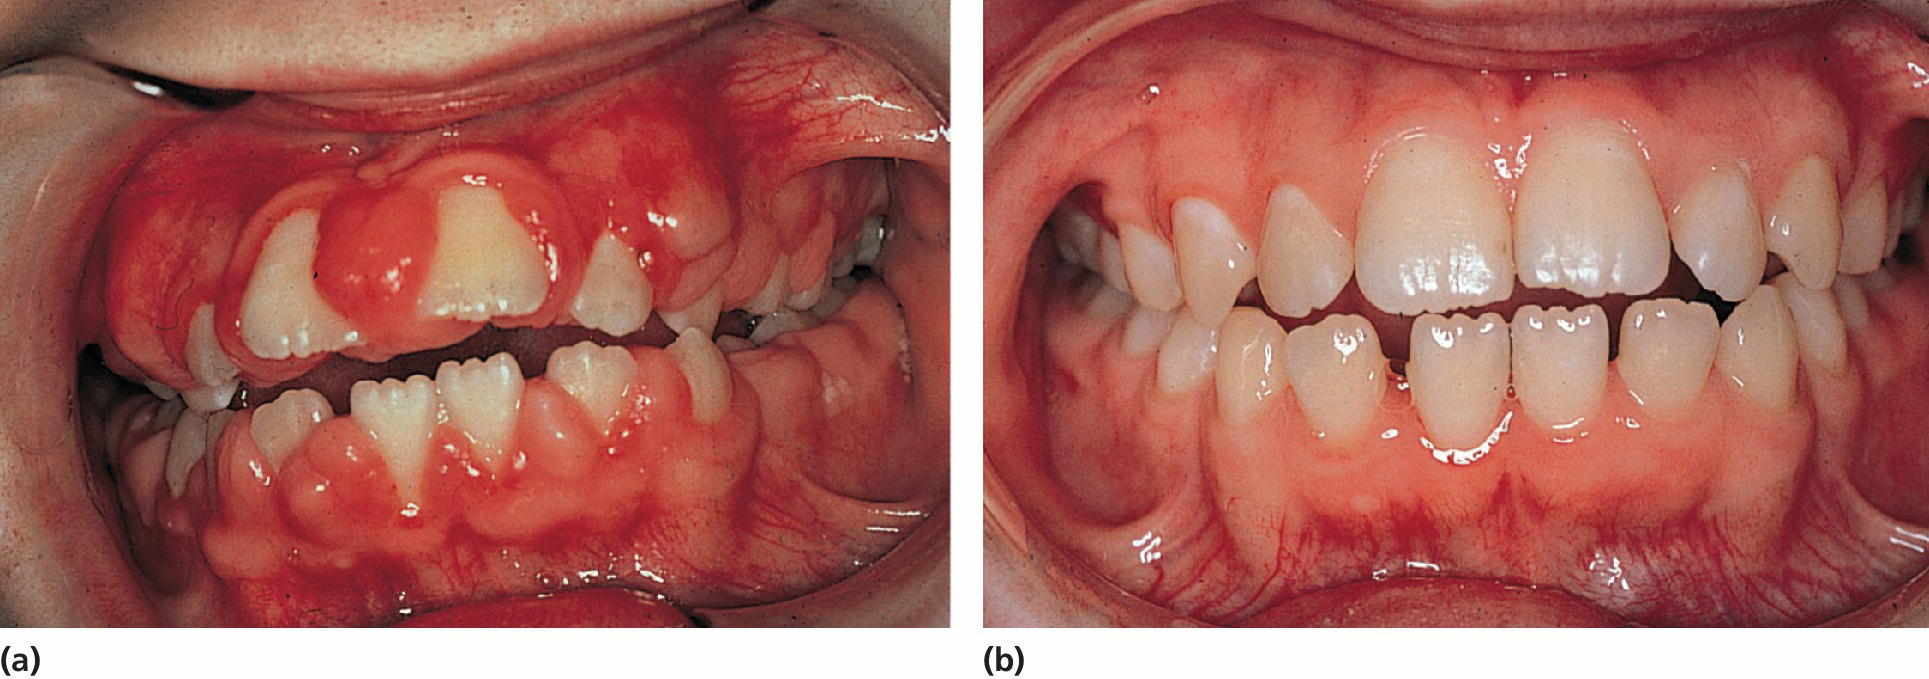 Left: Photo of a 10‐year‐old girl exhibiting severe gingival overgrowth. Right: Photo of a girl at 13 years, exhibiting a normal gingival 1 year after gingivectomy and discontinuation of phenytoin medication.